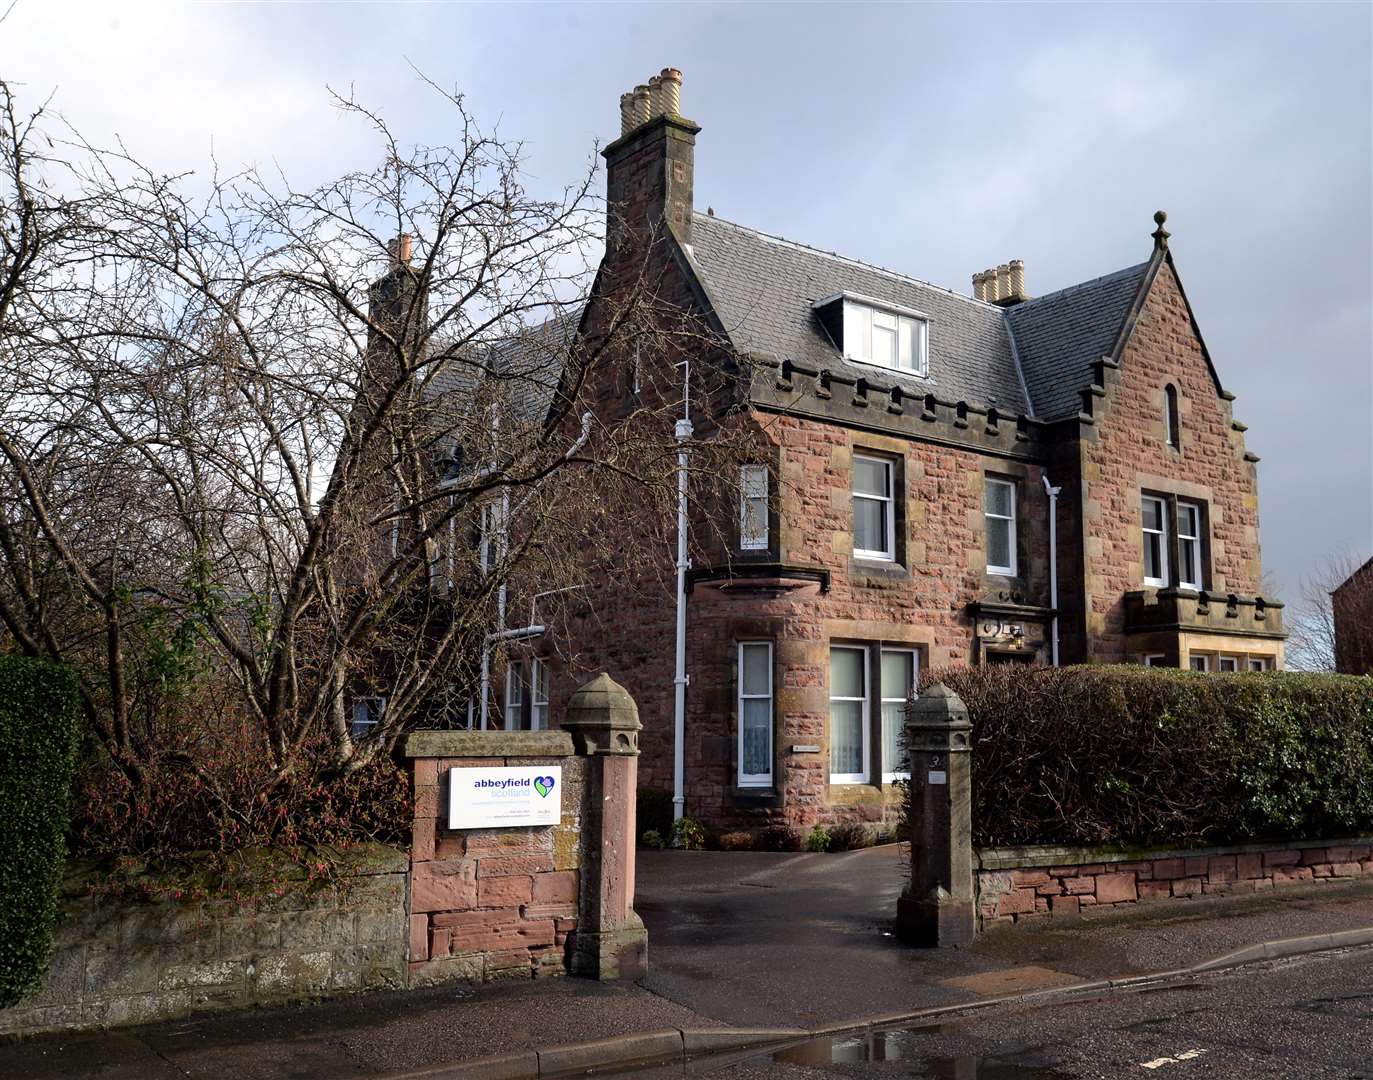 Abbeyfield House requires substantial investment, say charity operators.